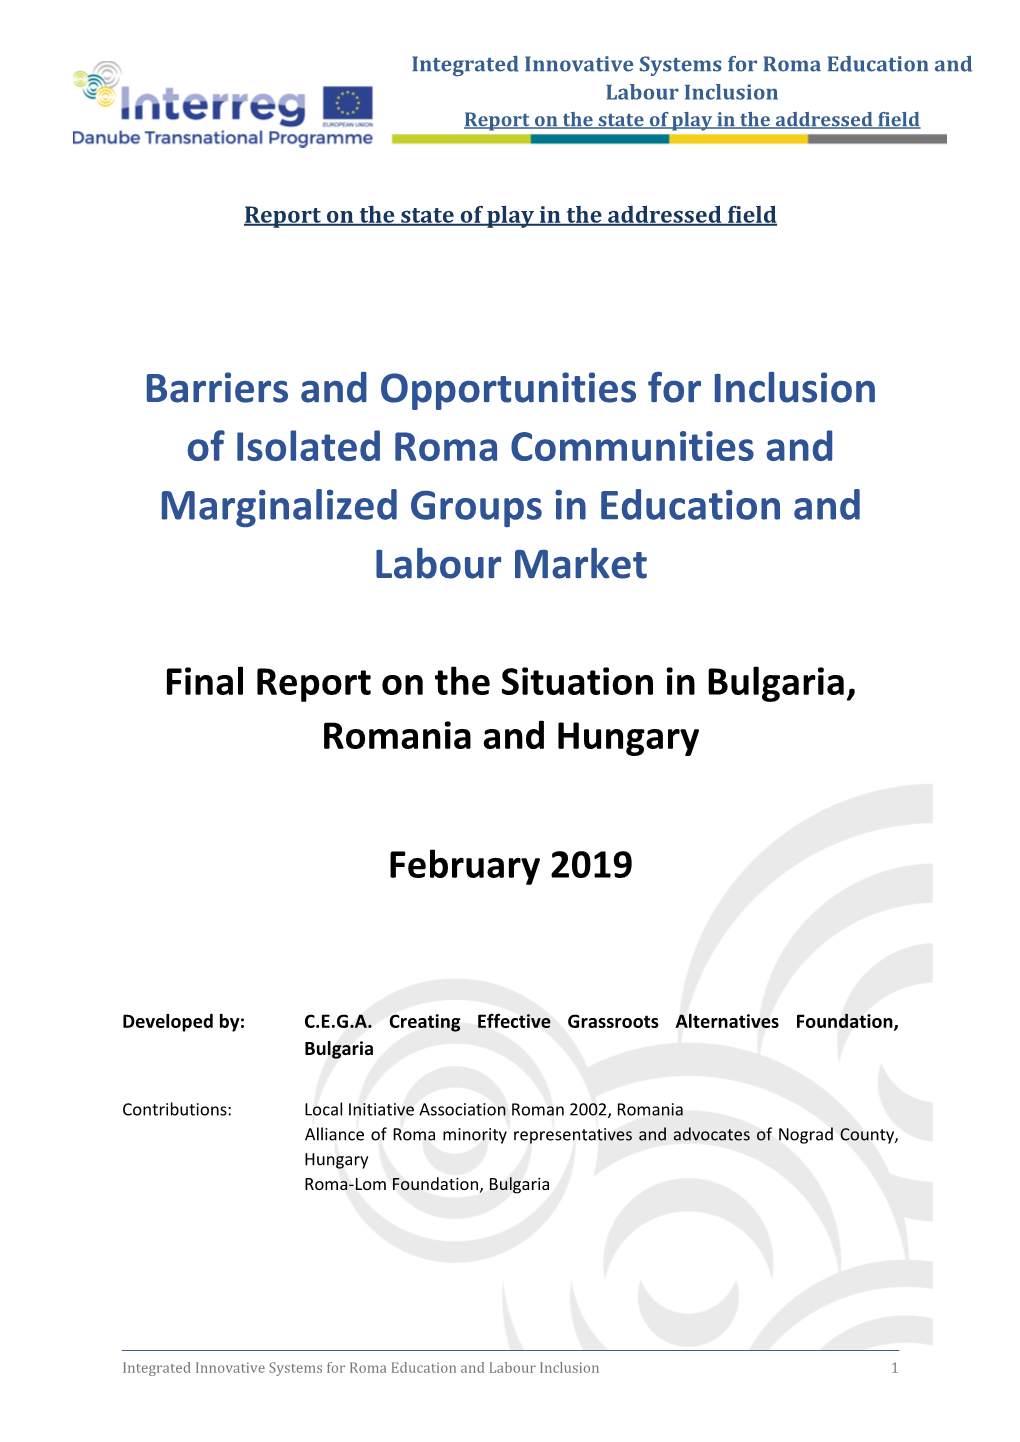 Final Report on the Situation in Bulgaria, Romania and Hungary